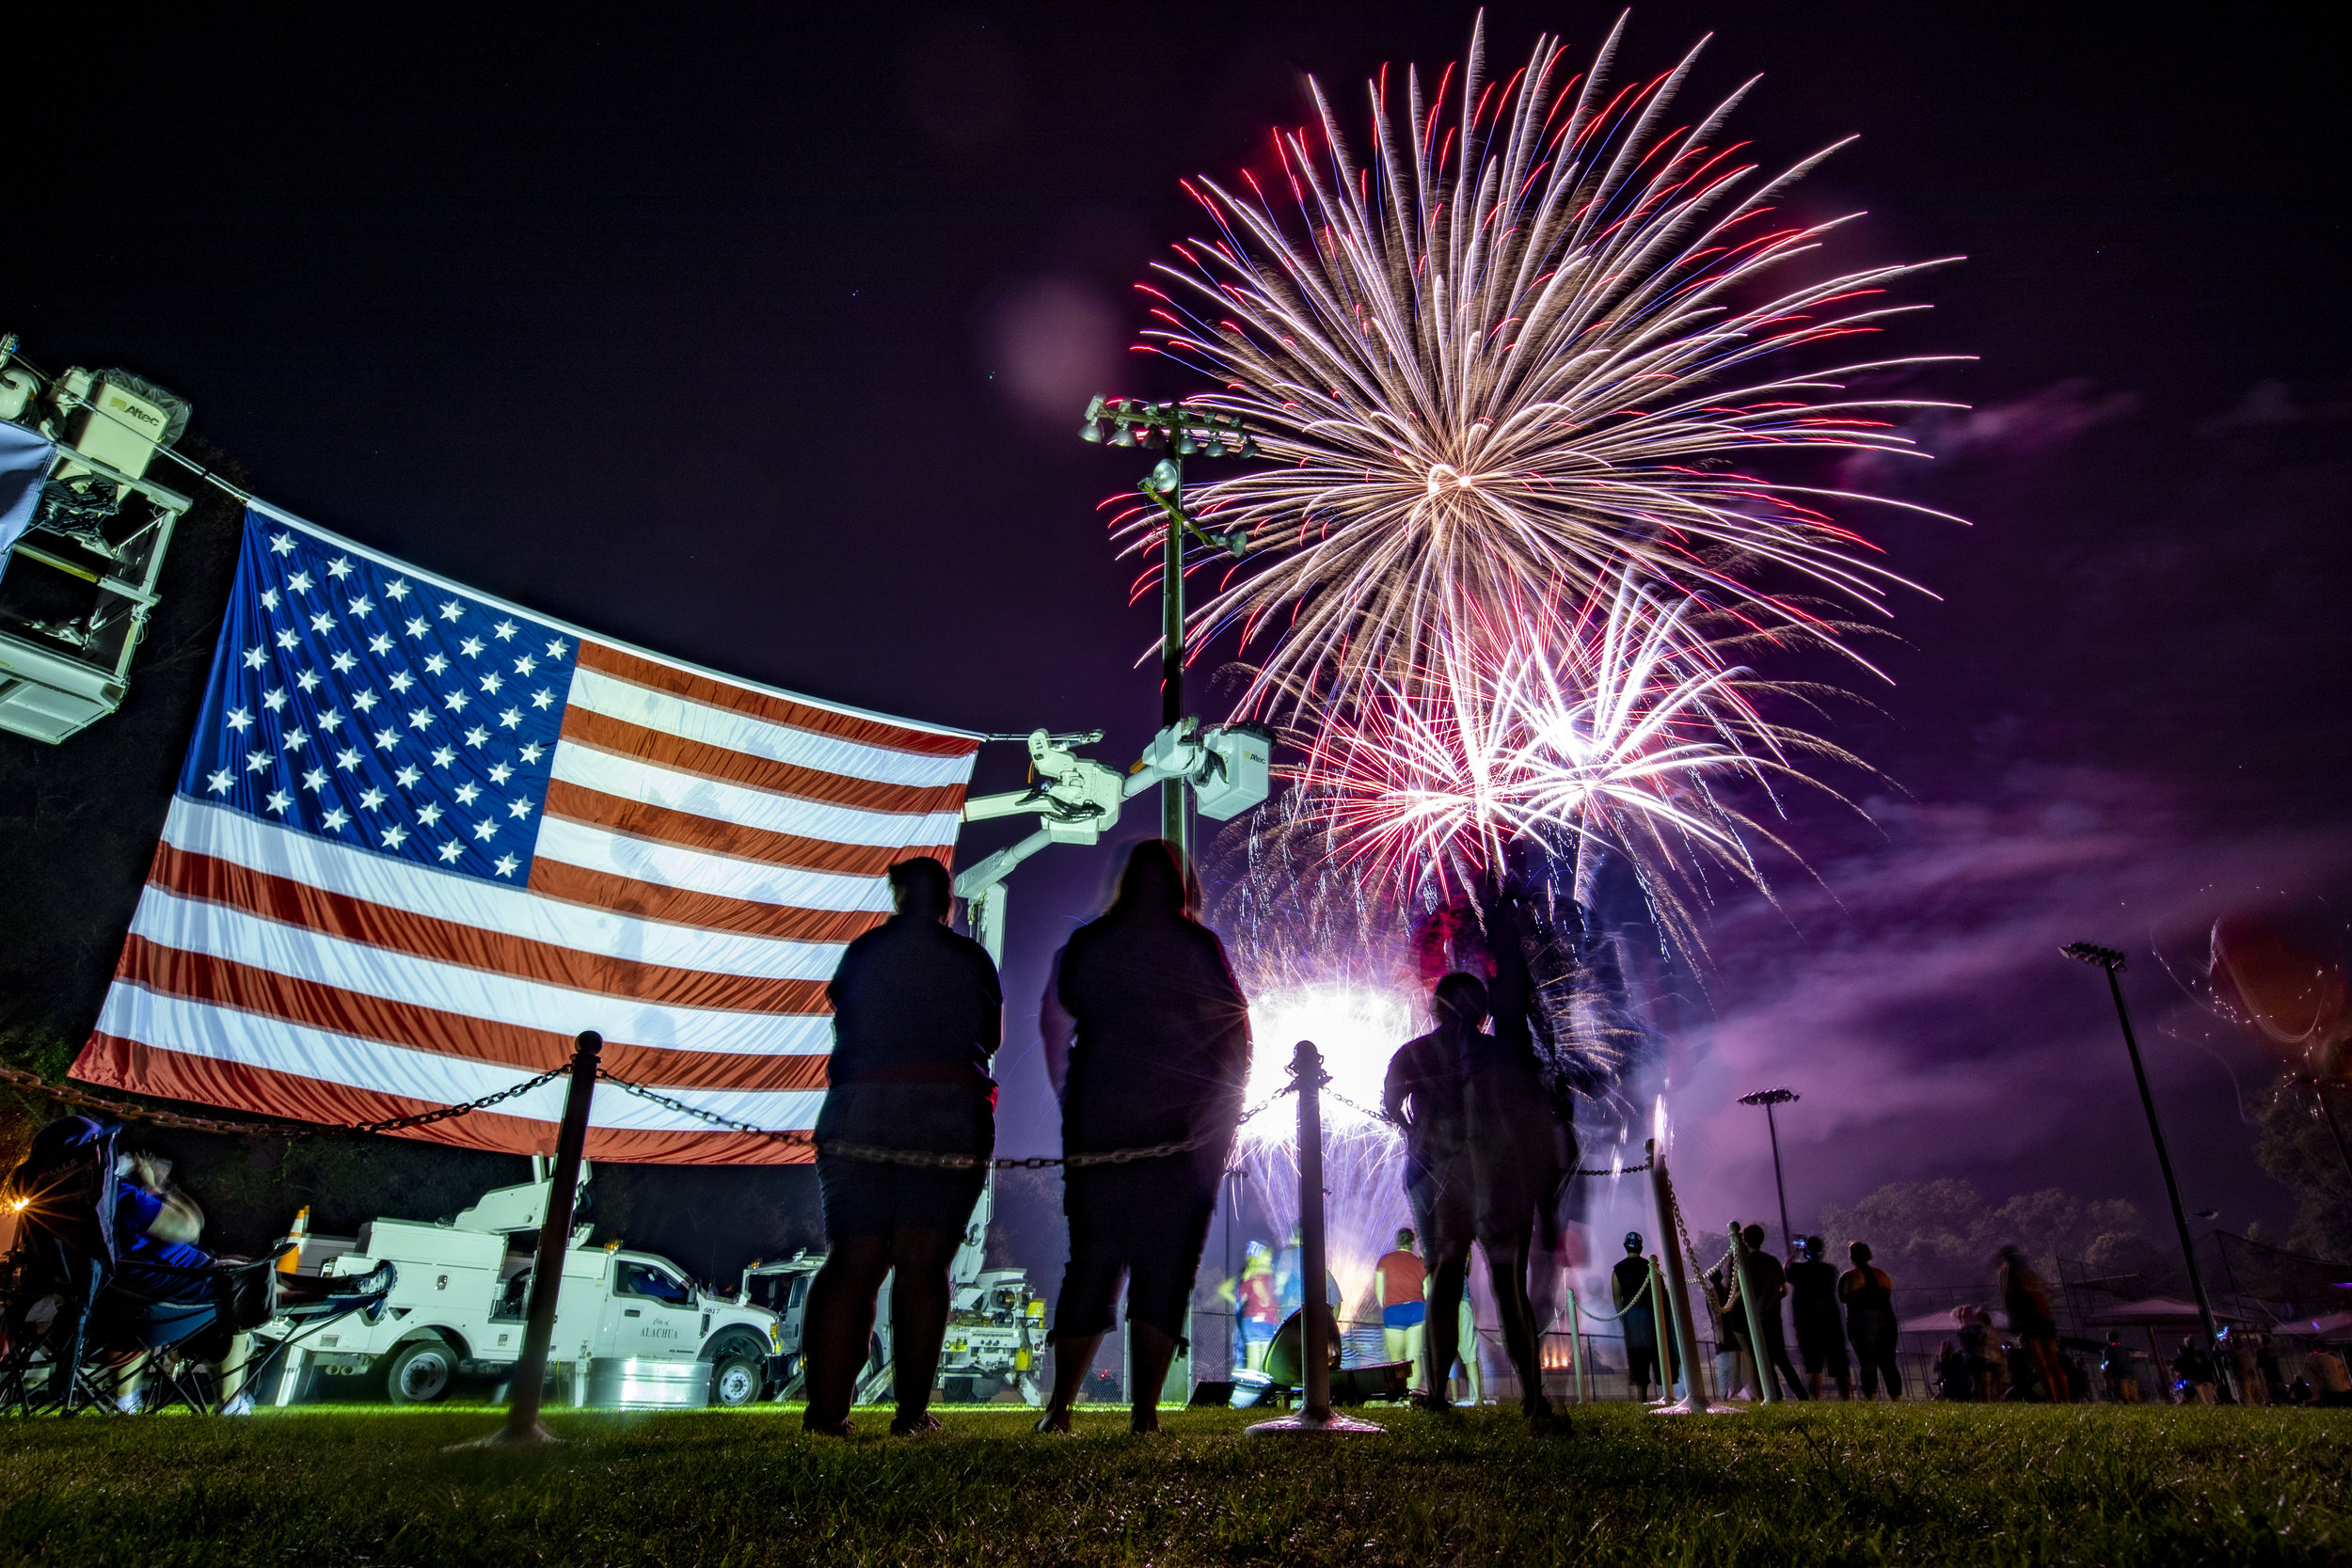  A giant American flag hangs by the stage as people watch fireworks show at the Alachua Fourth of July Celebration at the Hal Brady Recreation Complex on Wednesday. Alachua's firework display has been dubbed the “Largest Small Town Fireworks Display 